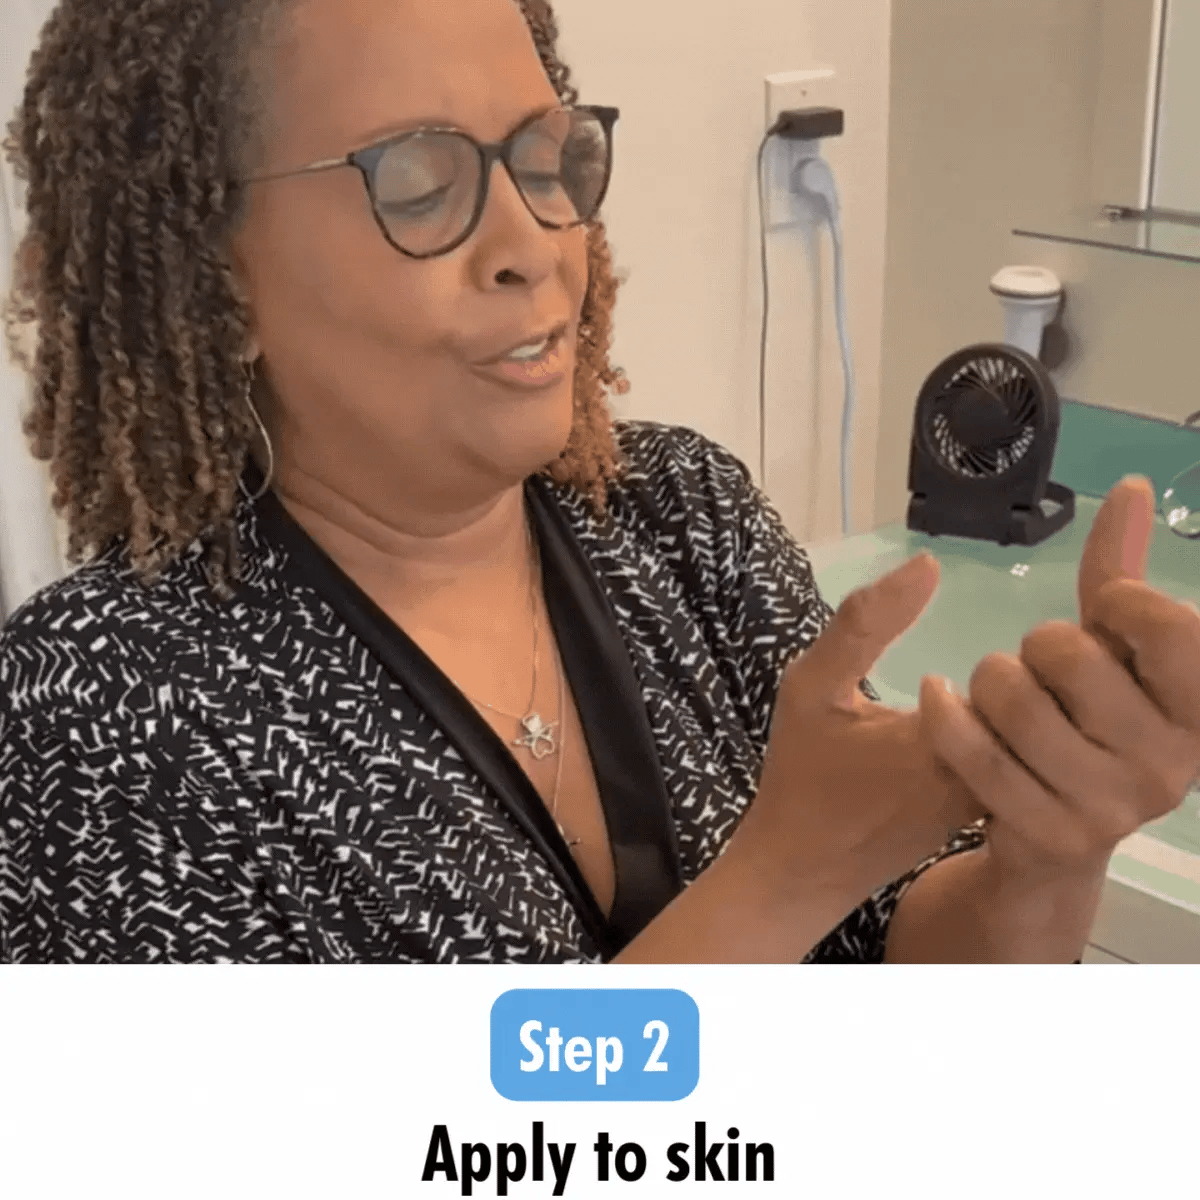 Animated guide on the second step of applying Mirai Clinical's body lotion, emphasizing the correct massaging techniques for deep hydration and effective nonenal body odor elimination